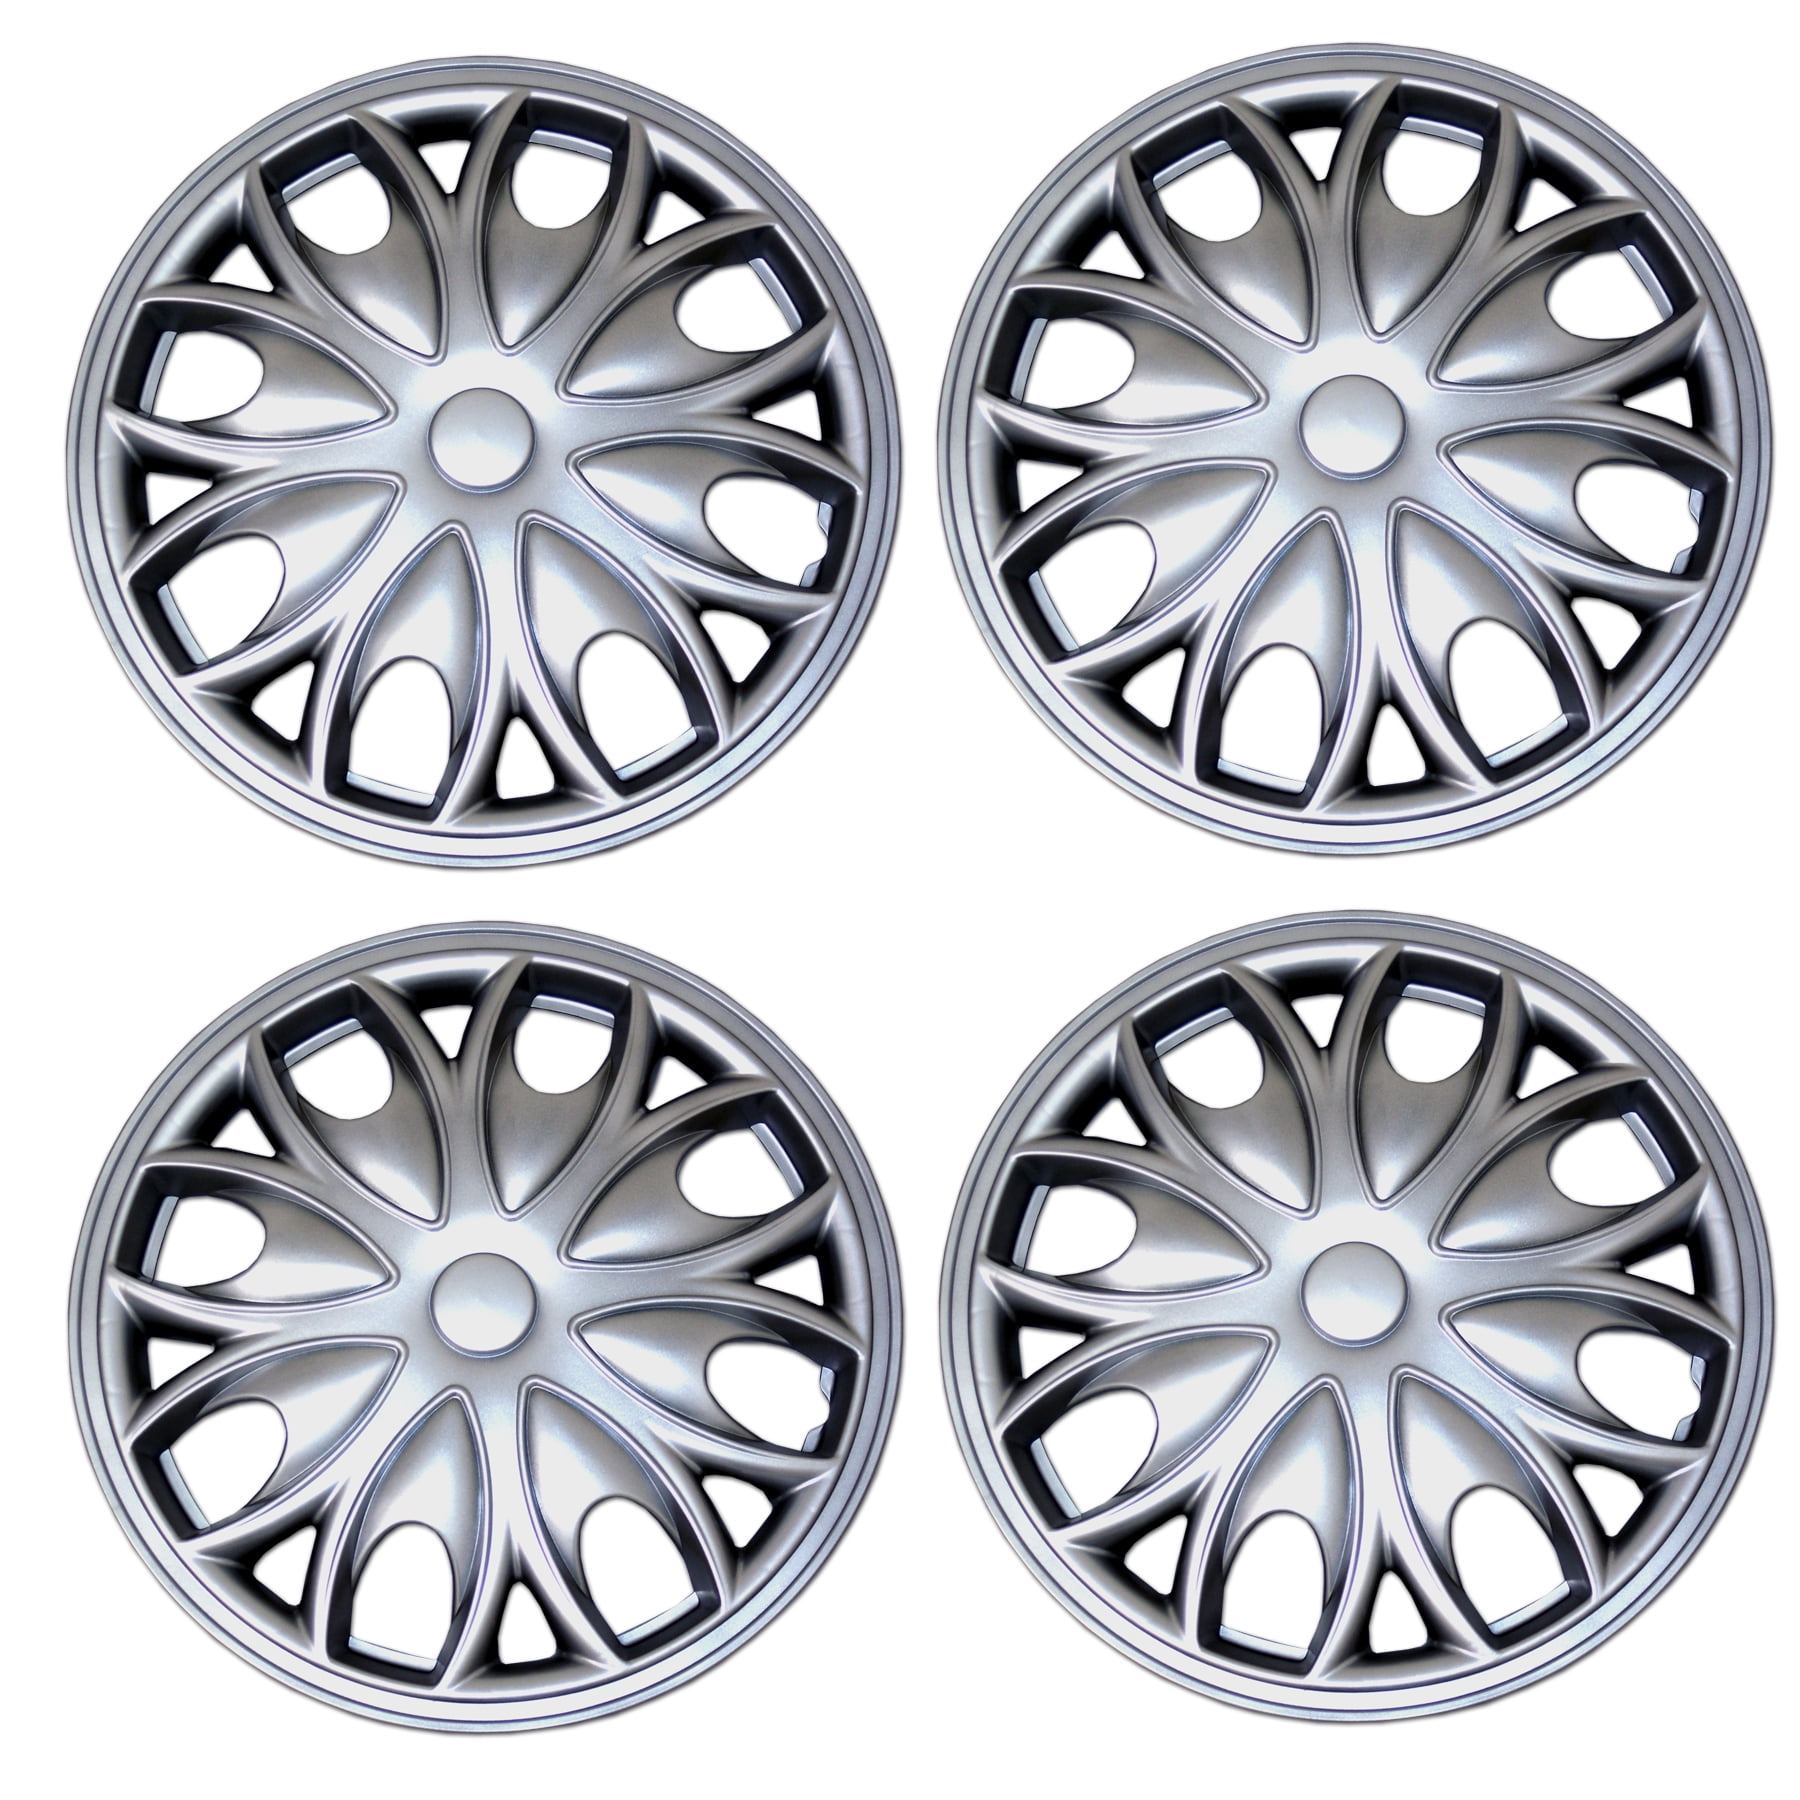 Pop-On TuningPros WSC3-126S15 4pcs Set Snap-On Type 15-Inches Metallic Silver Hubcaps Wheel Cover 